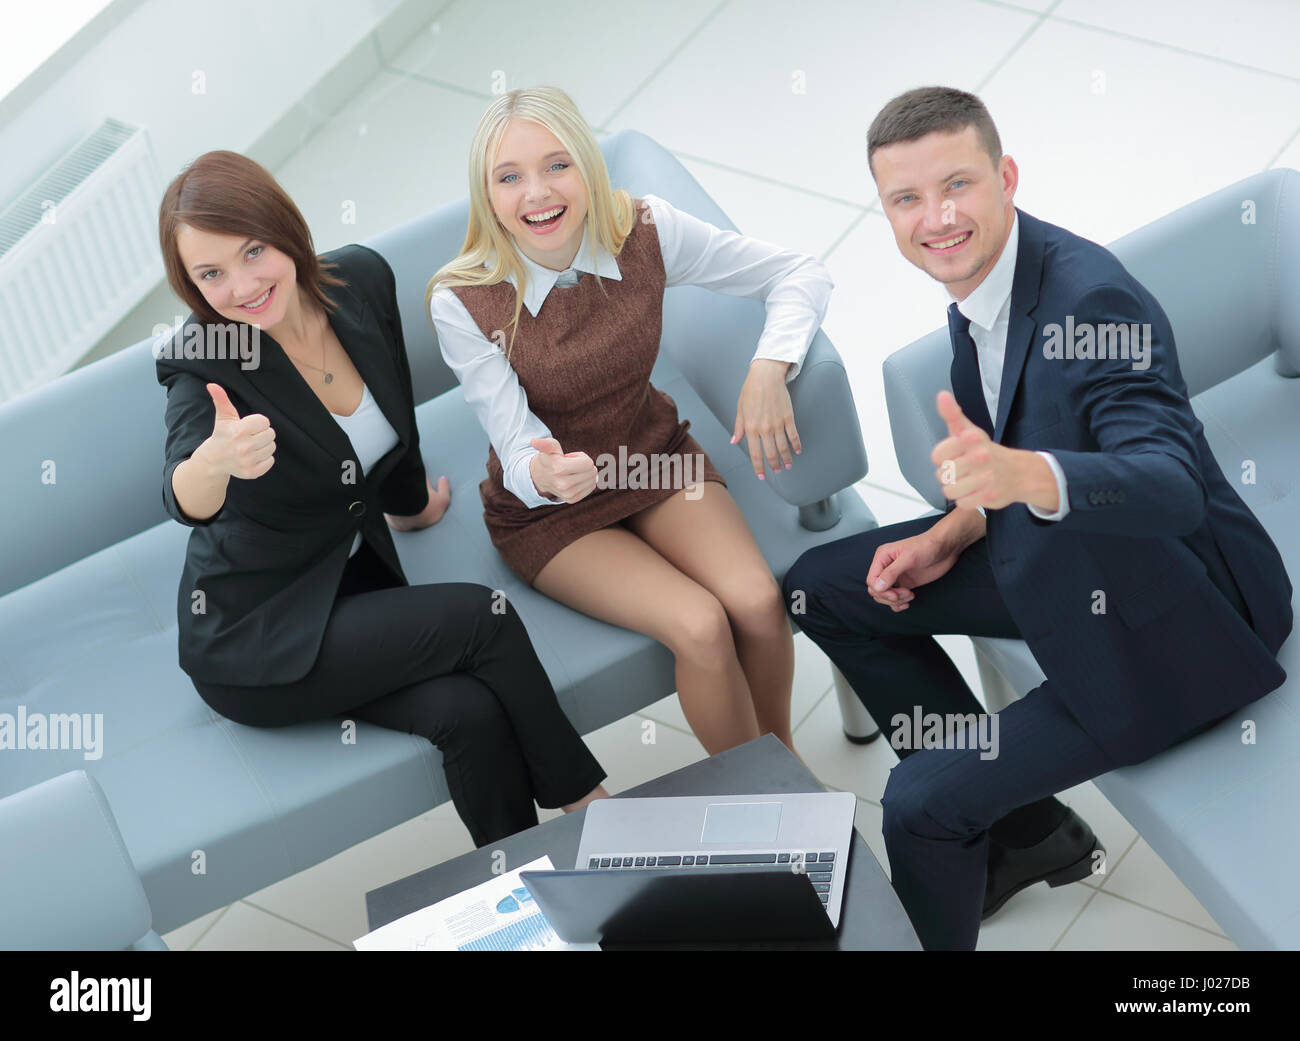 Business people at work. Happy business people in formalwear sho Stock Photo